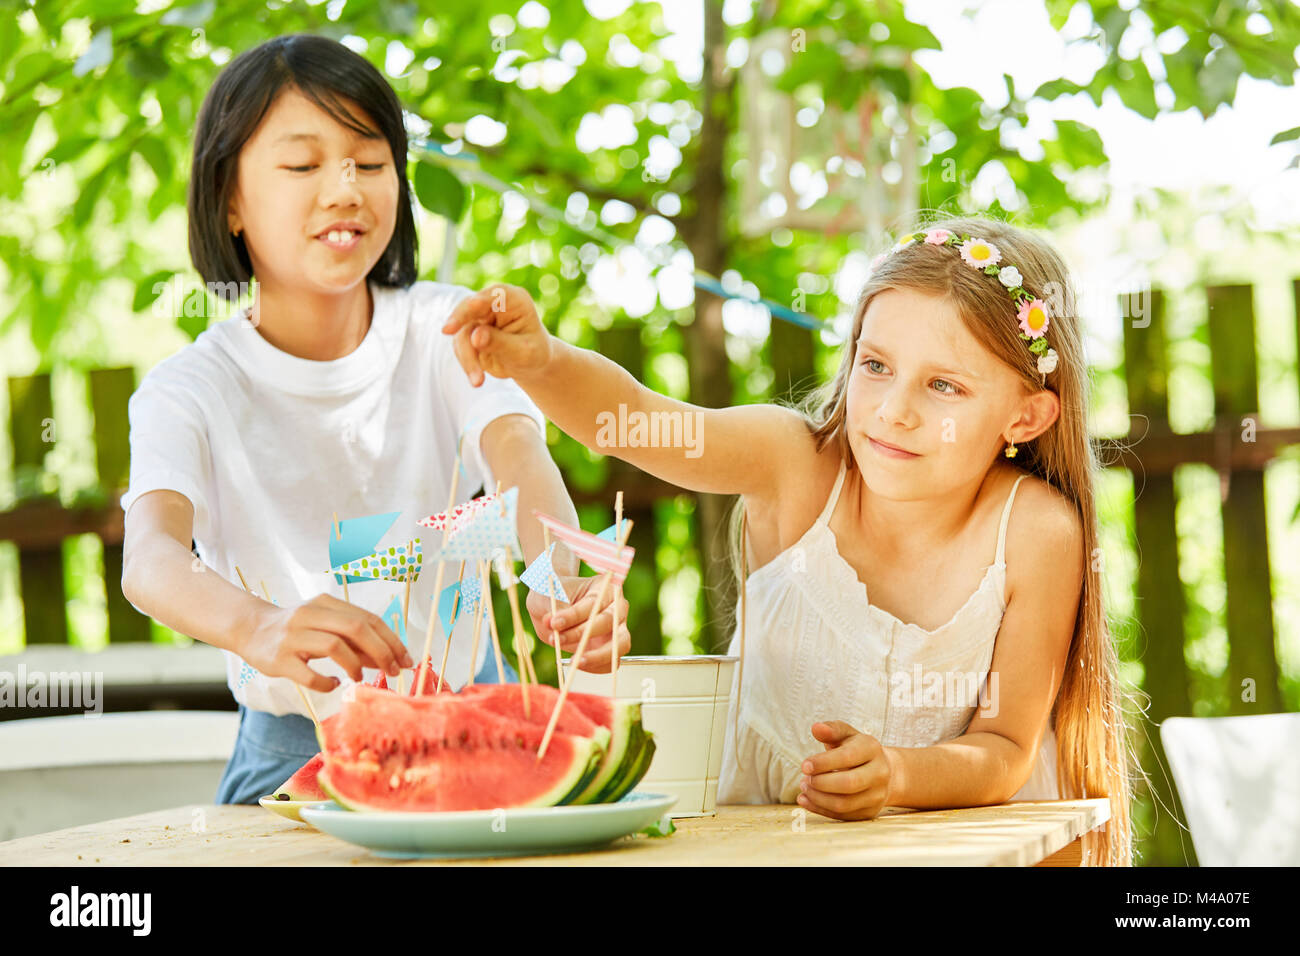 Two girls are putting decorative flags on watermelons at a party Stock Photo